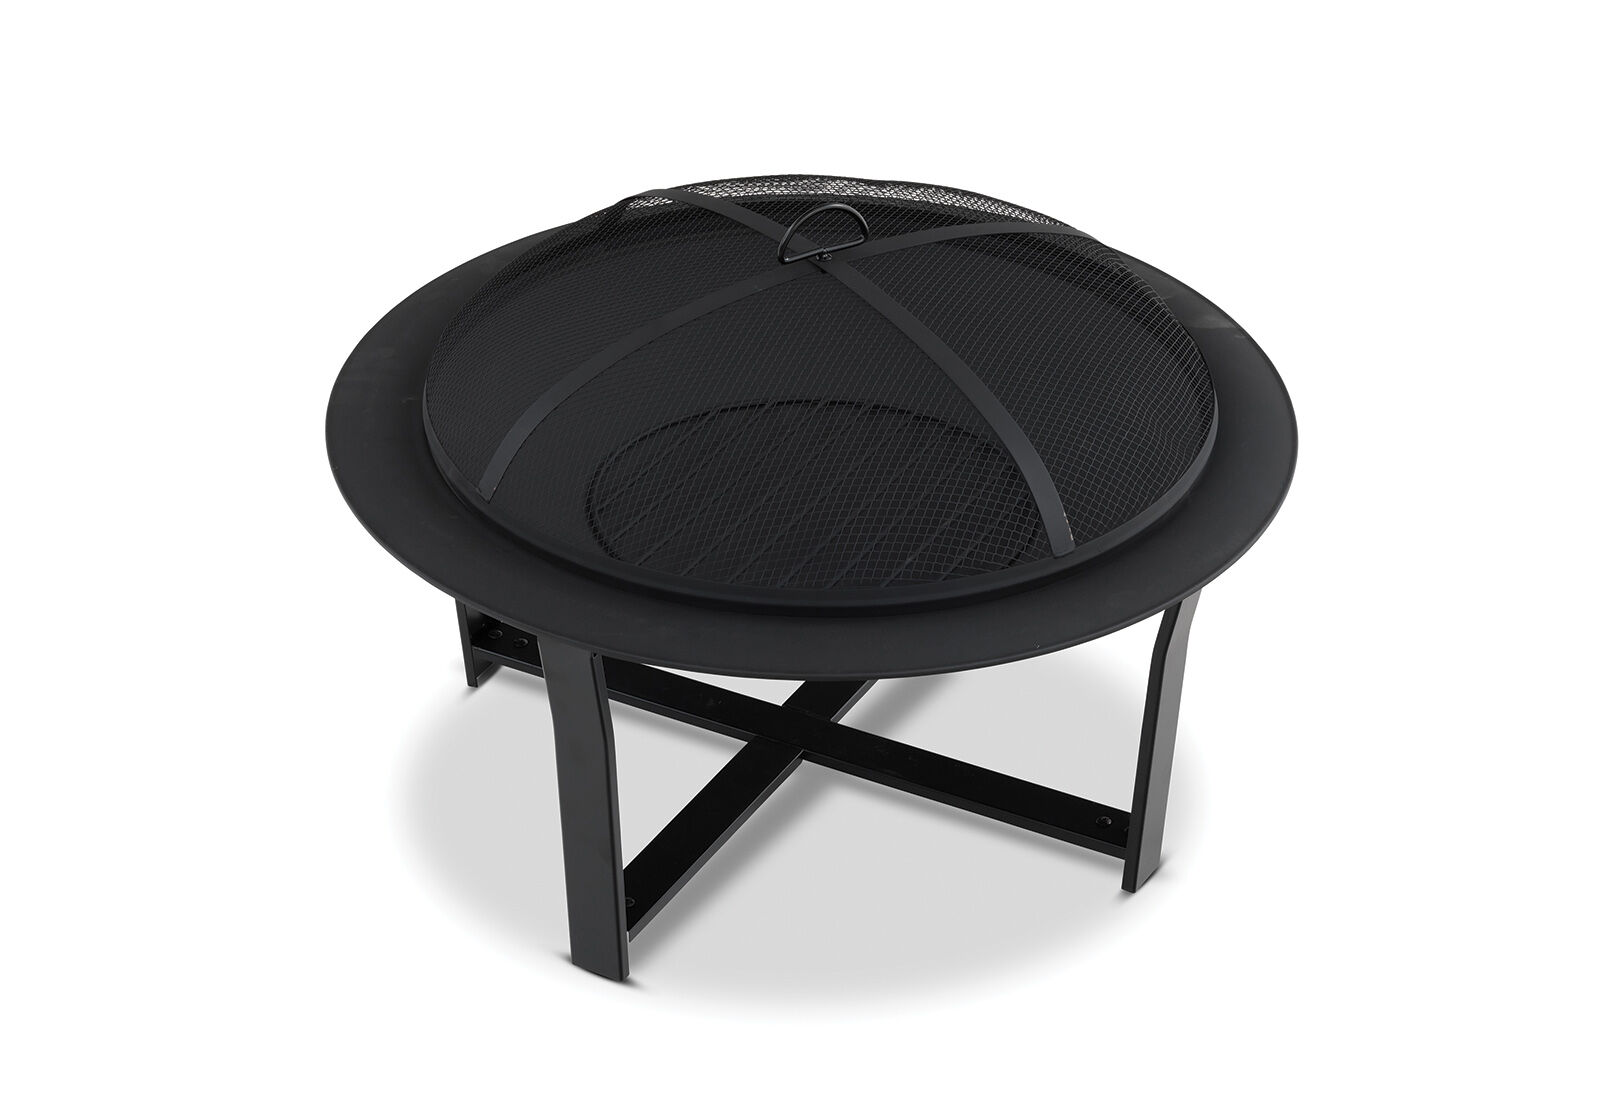 Black Jarvie Fire Pit With Grill, Academy Fire Pit Black Friday